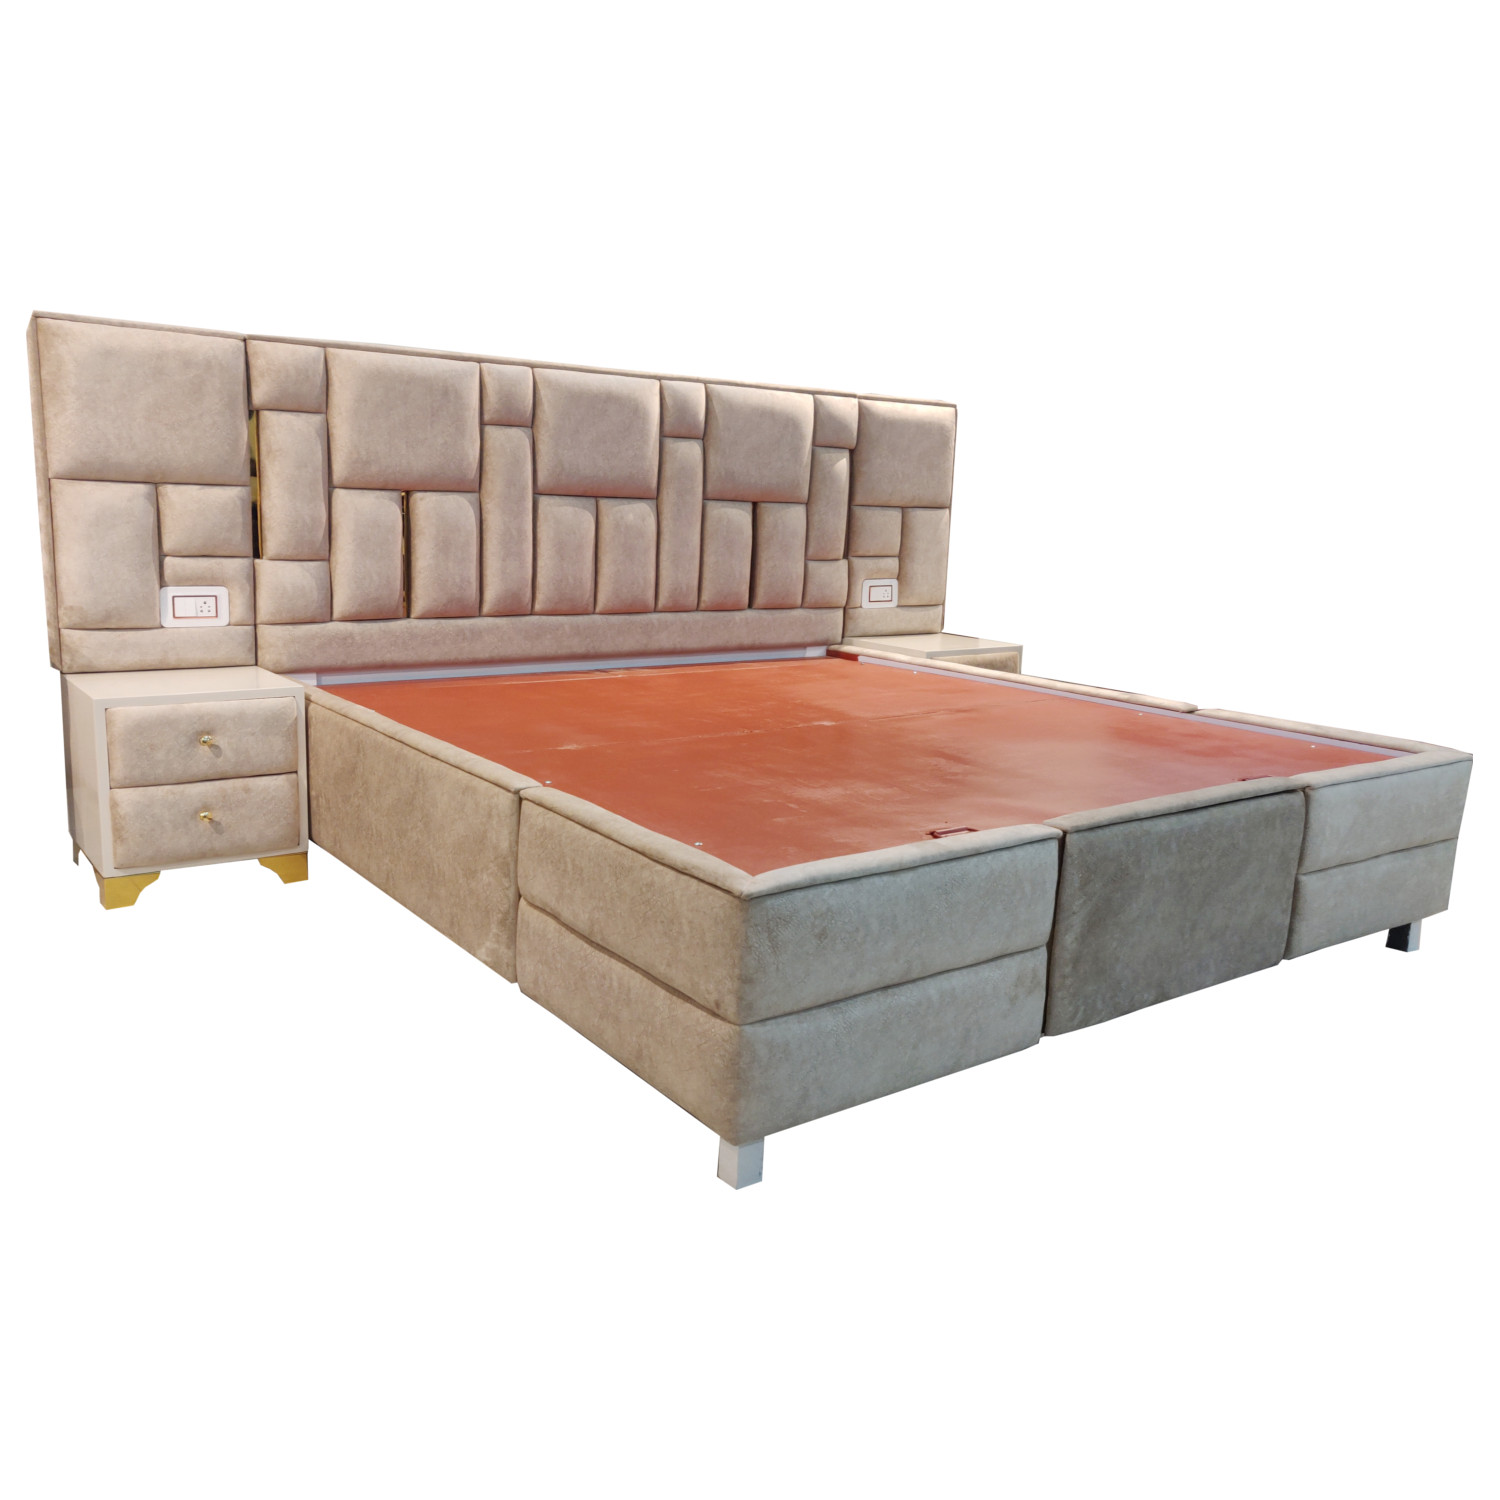 Amaltas Signature Double Bed with Side Tables and Box Storage